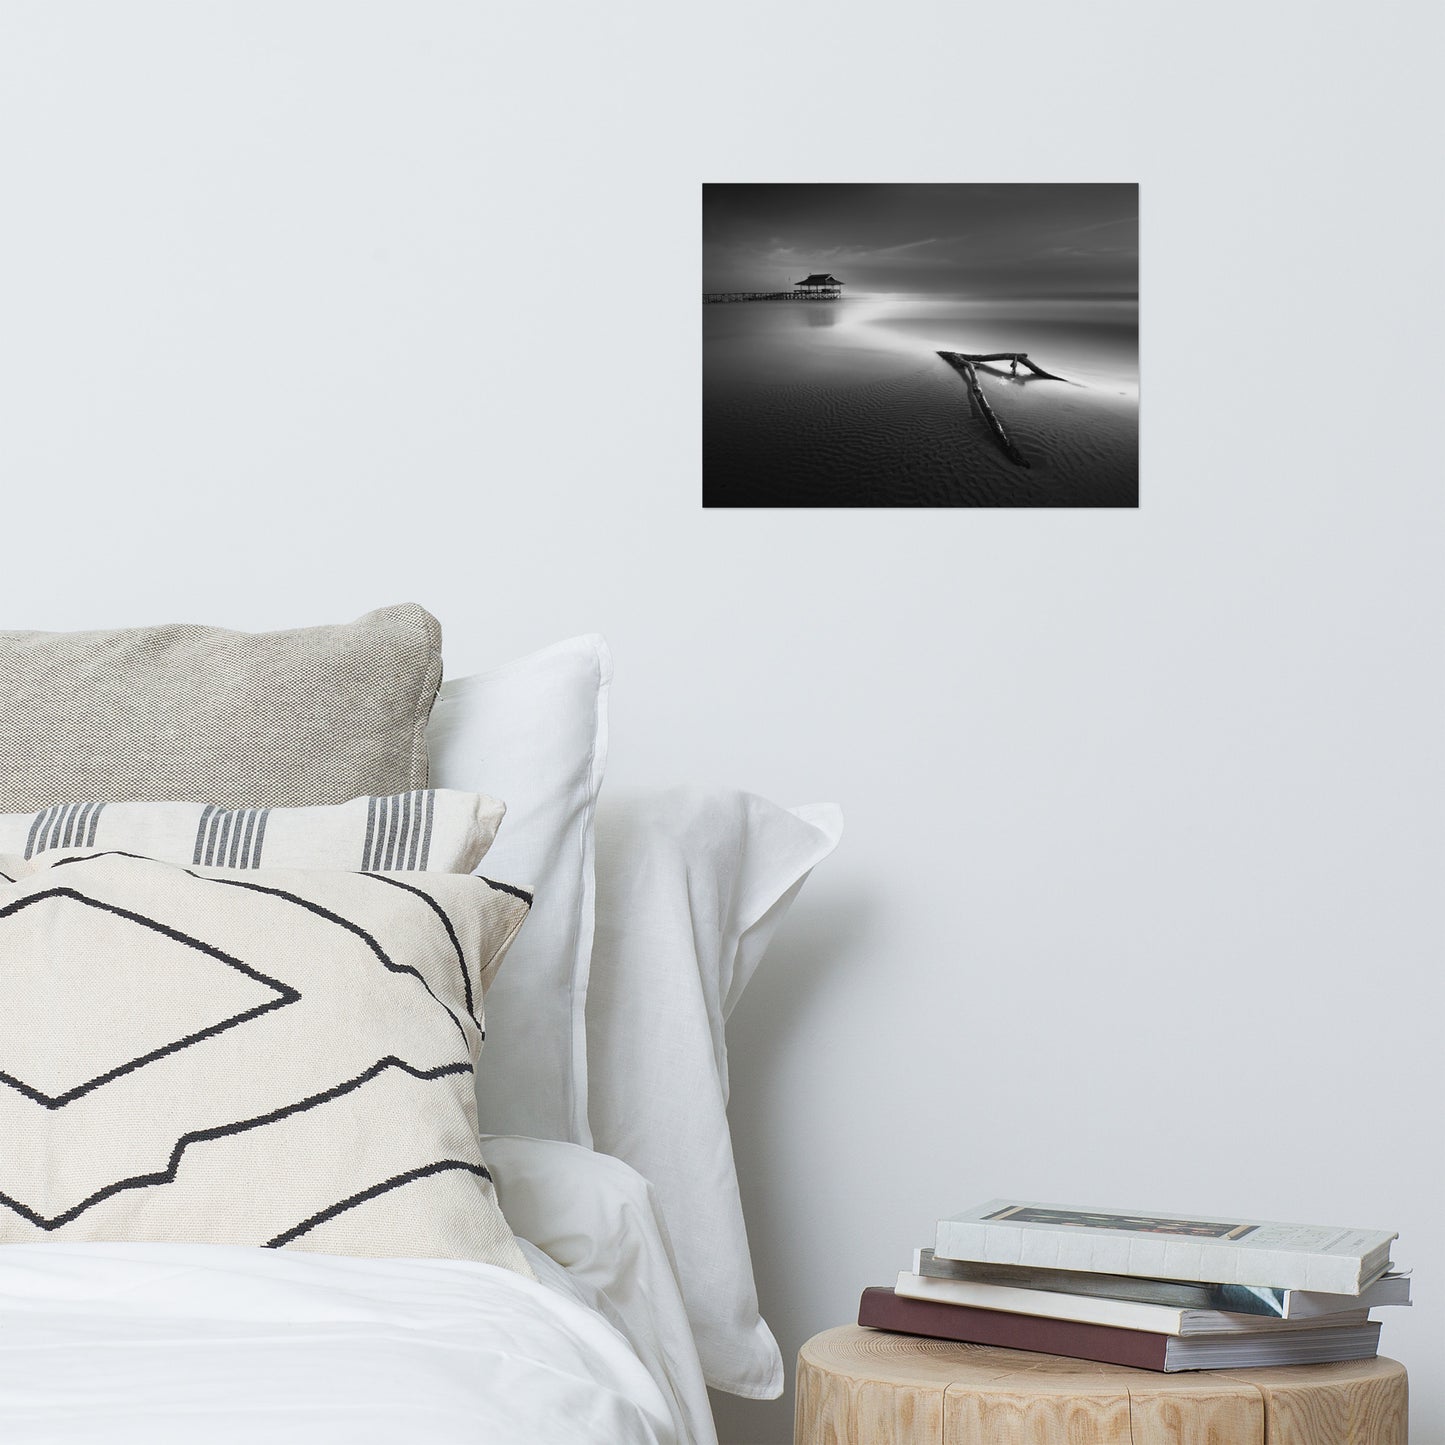 Dramatic Beach with Driftwood Black and White Coastal Landscape Photo Loose Wall Art Prints